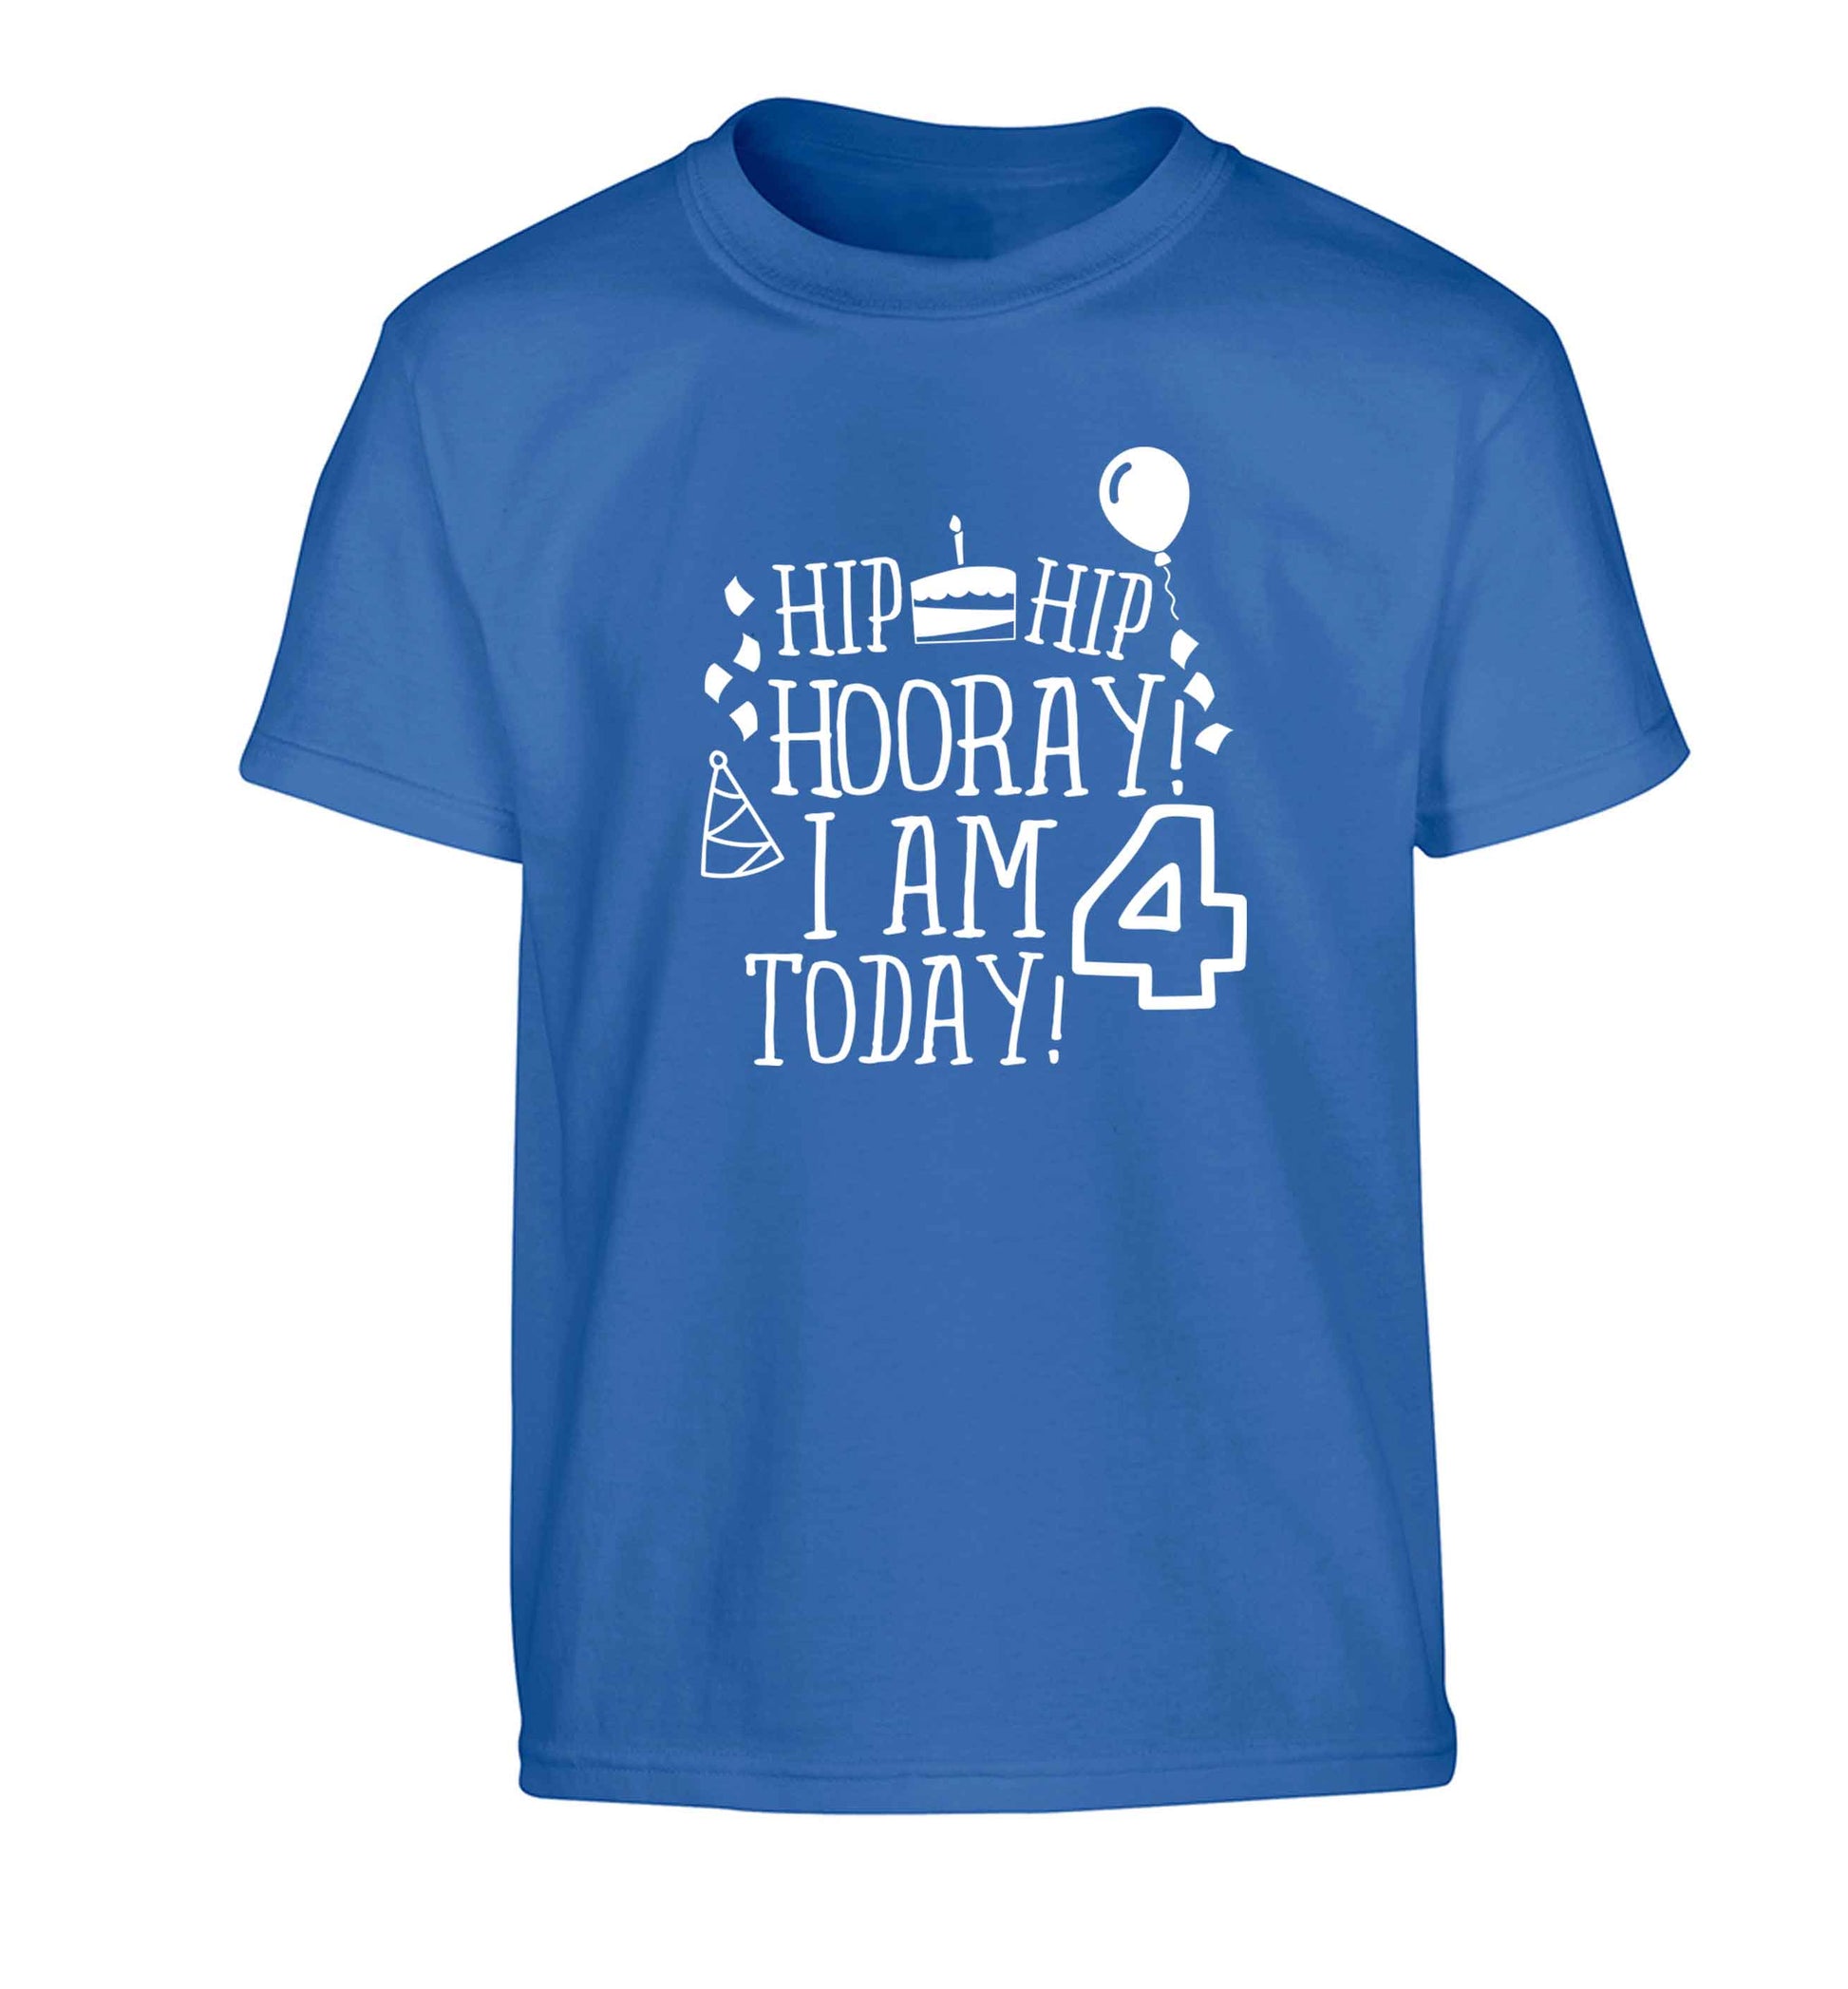 Hip hip hooray I am four today! Children's blue Tshirt 12-13 Years